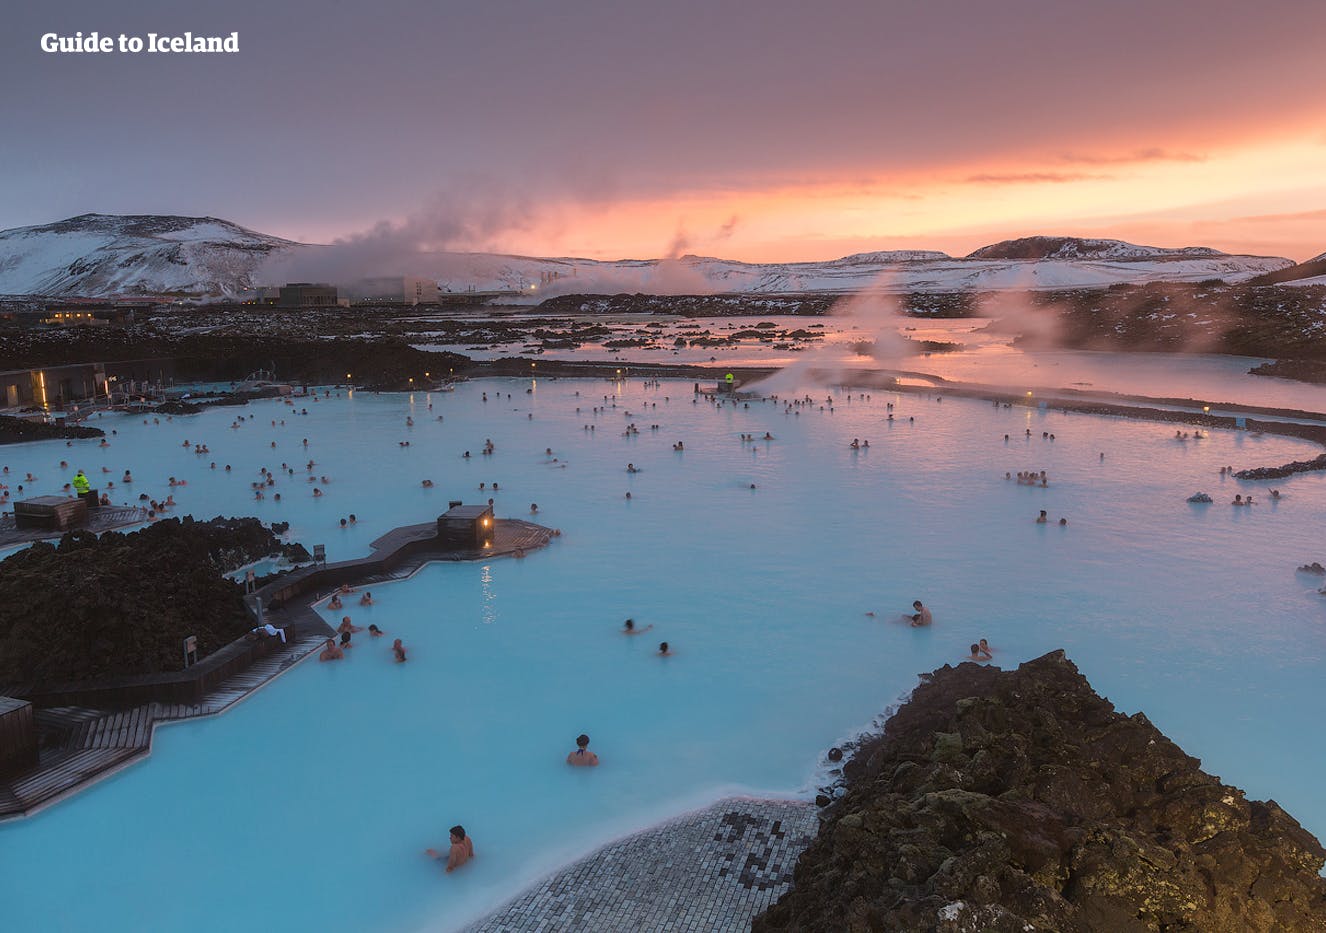 The Blue Lagoon is a place to escape and unwind on the Reykjanes Peninsula.